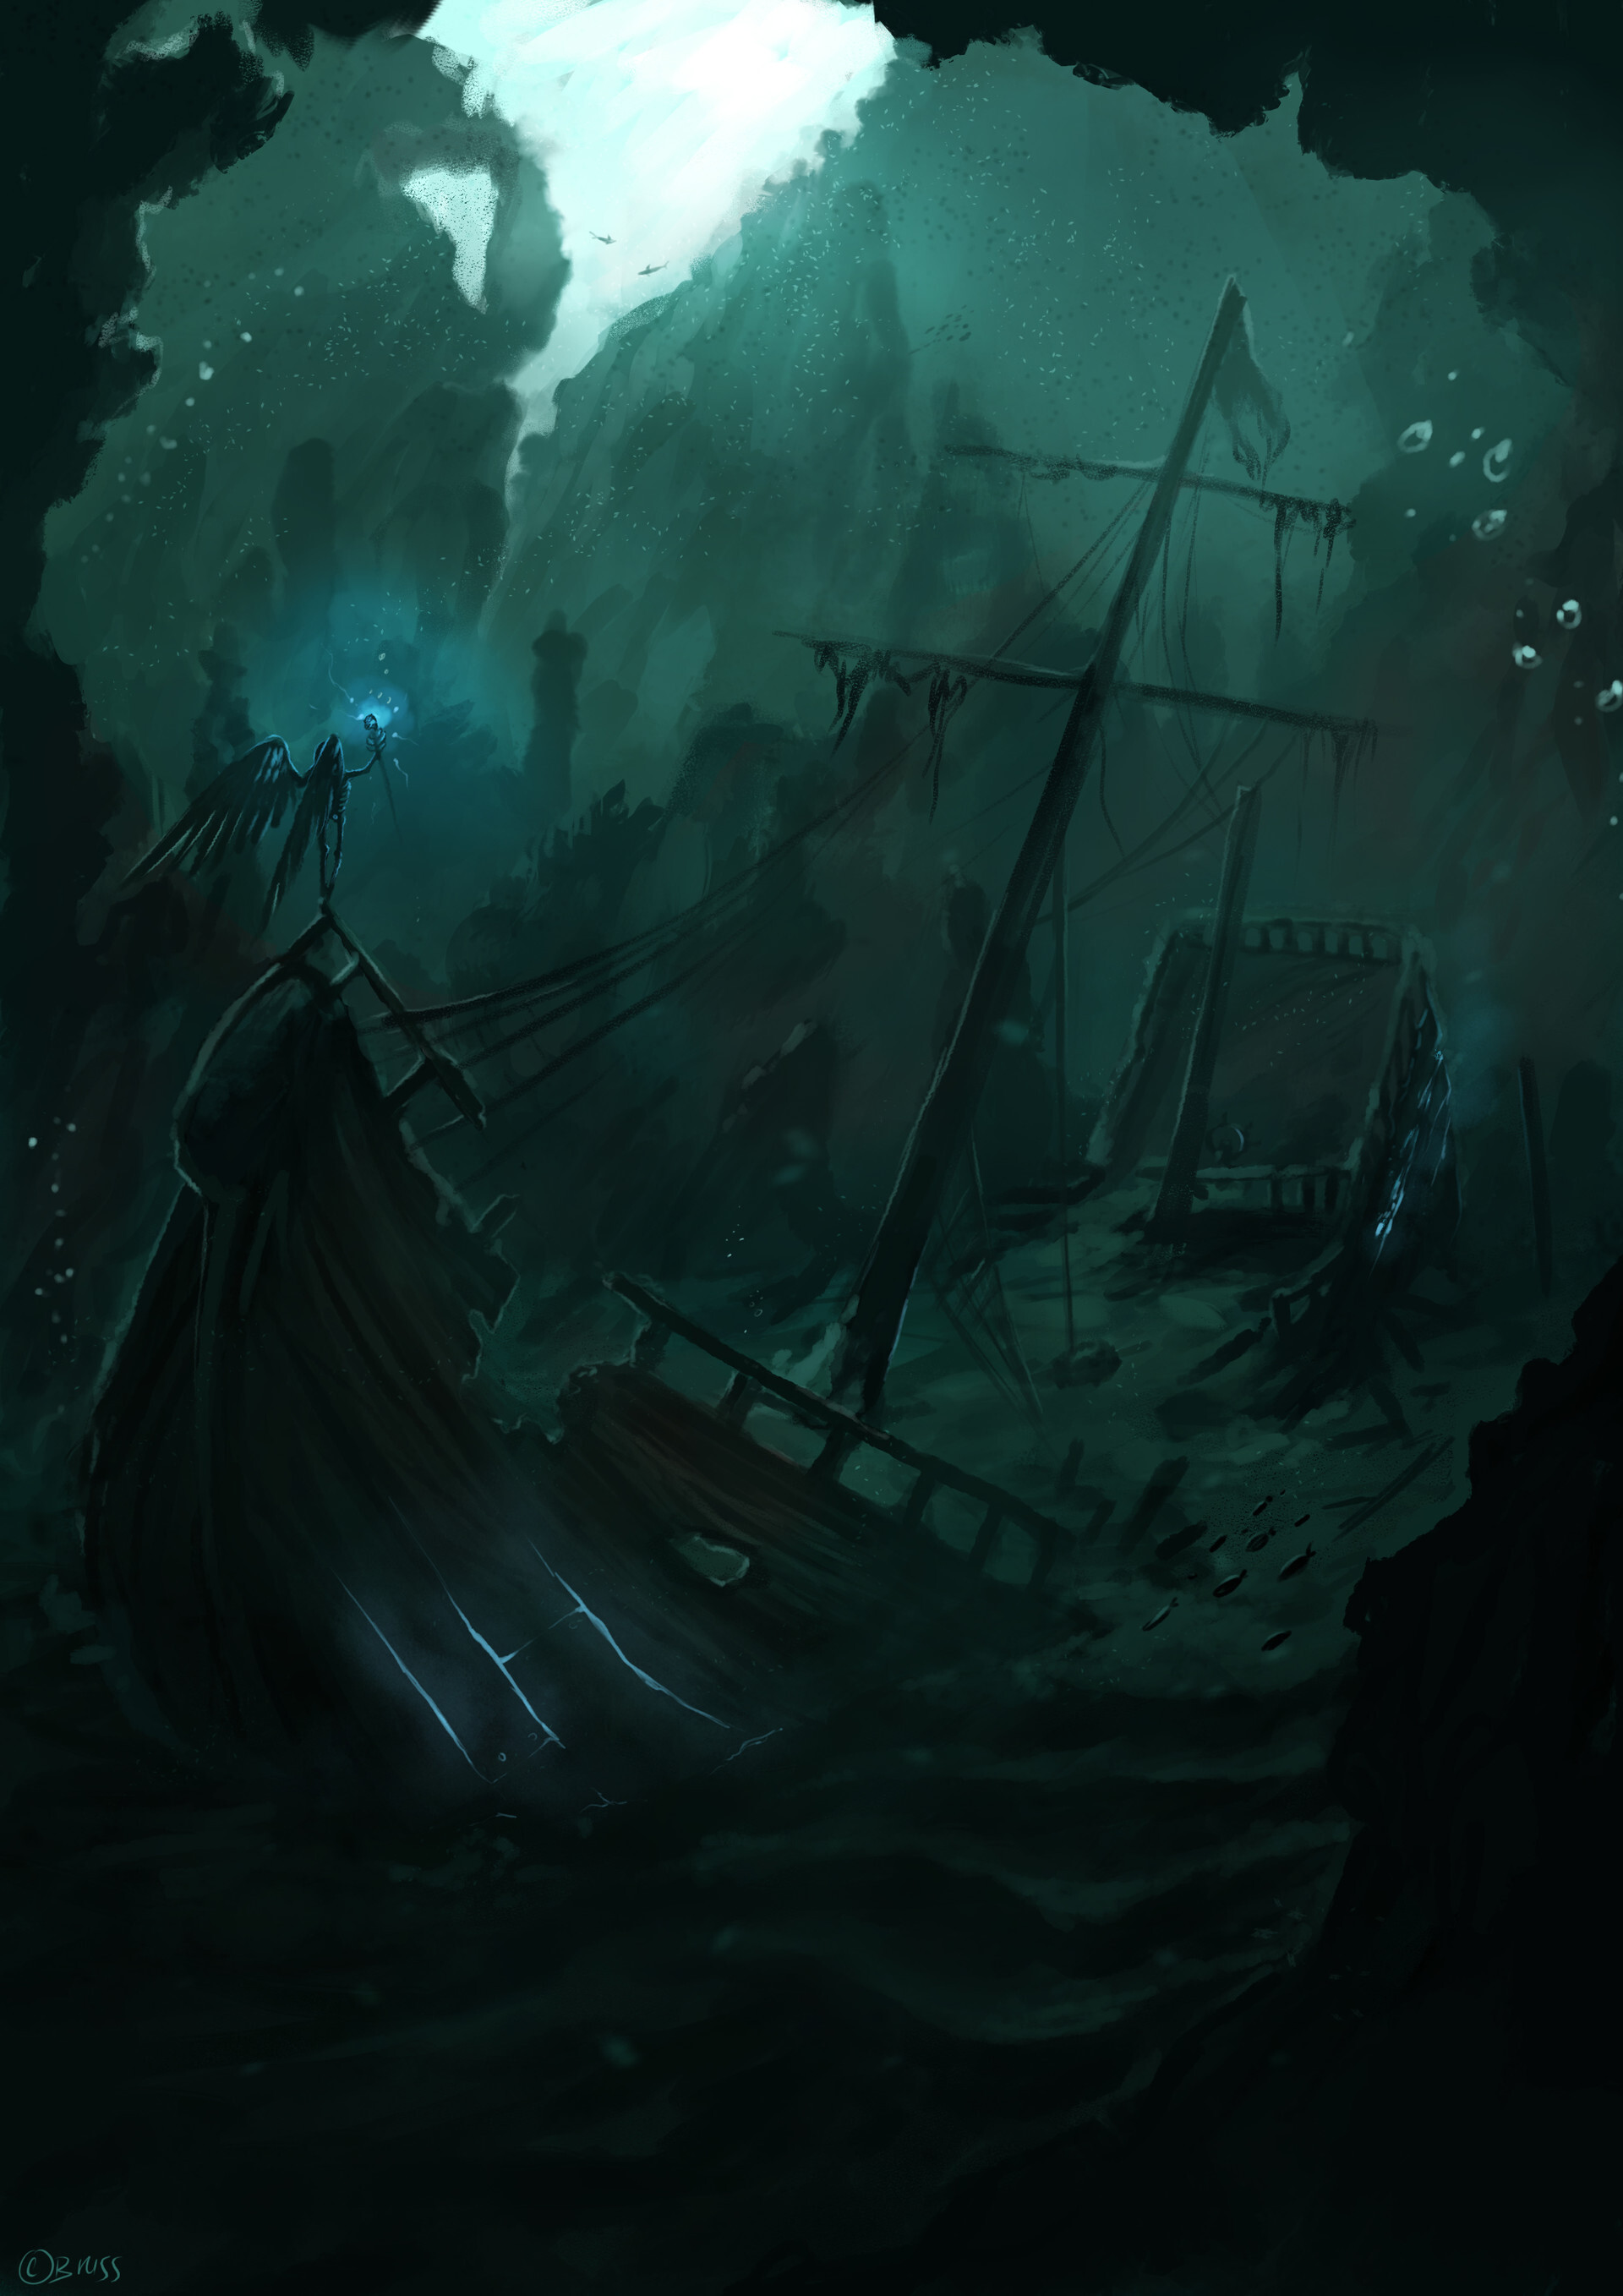 Ghost Ship: The shipwreck with a light in it, Mistics at the deep sea, Myths and legends of the ocean. 1920x2720 HD Wallpaper.